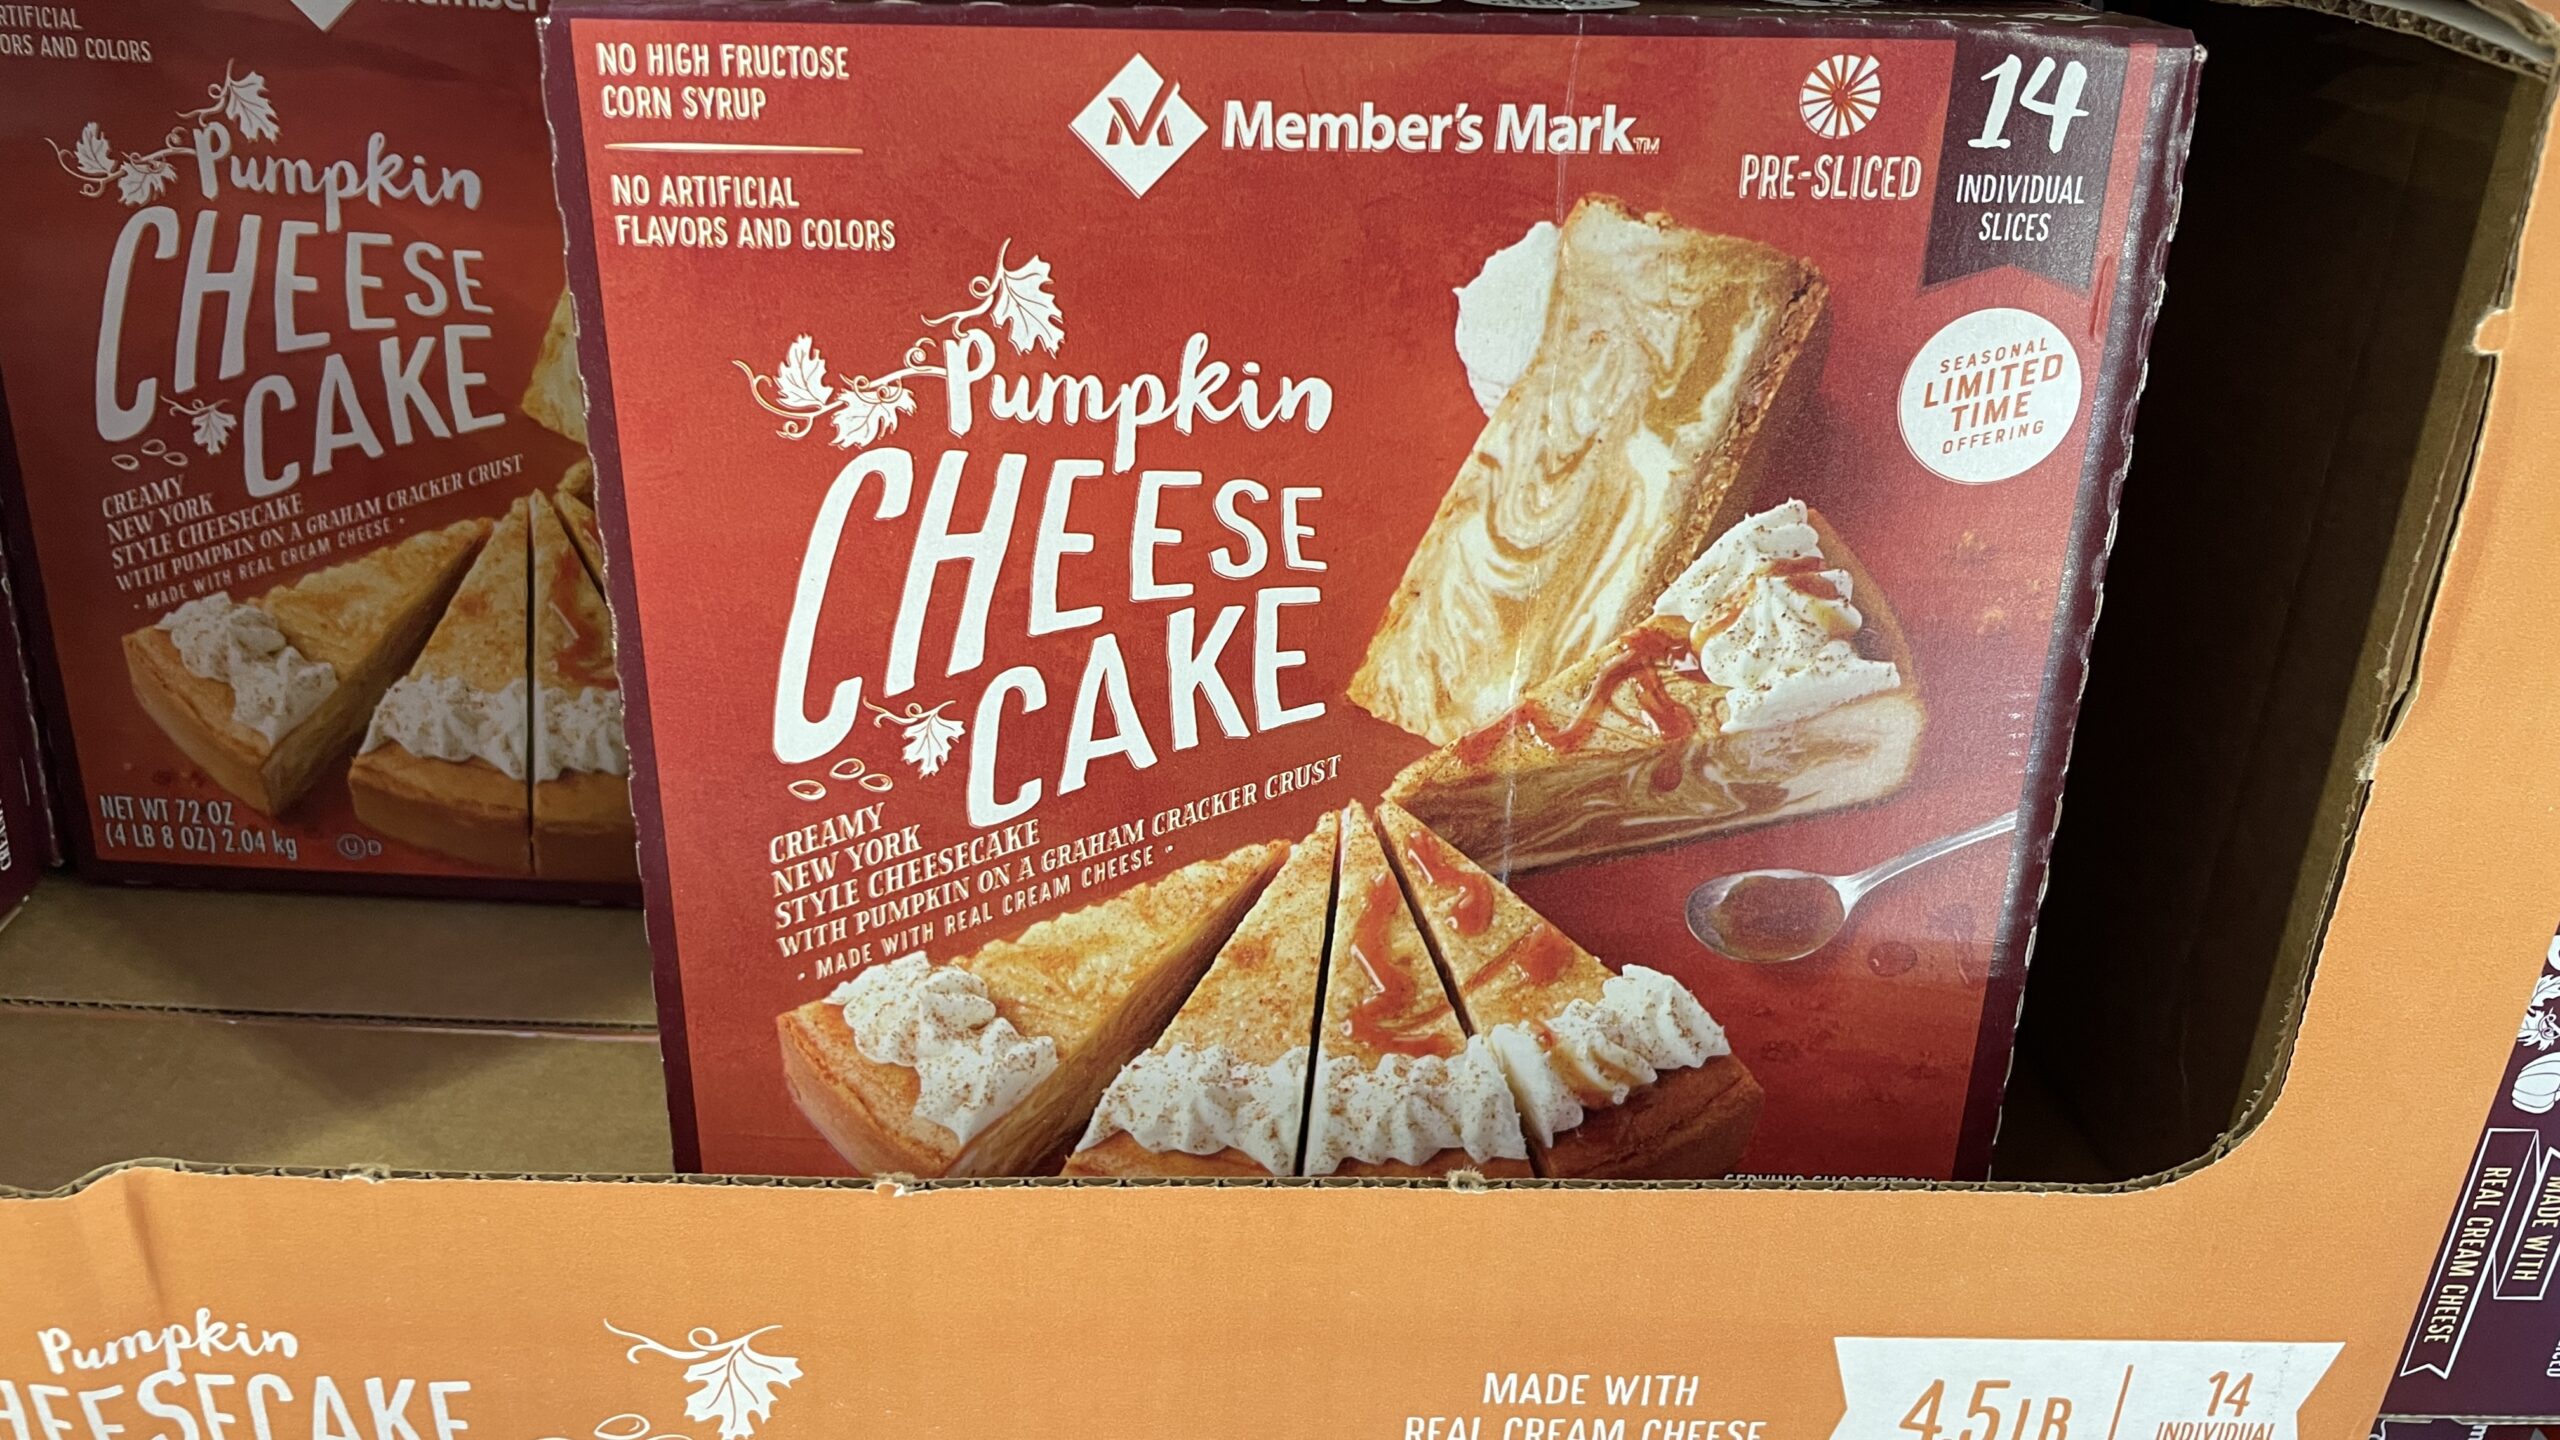 Sam’s Club is Selling Pumpkin Cheesecake So You Can Get Your Fall Dessert Fix